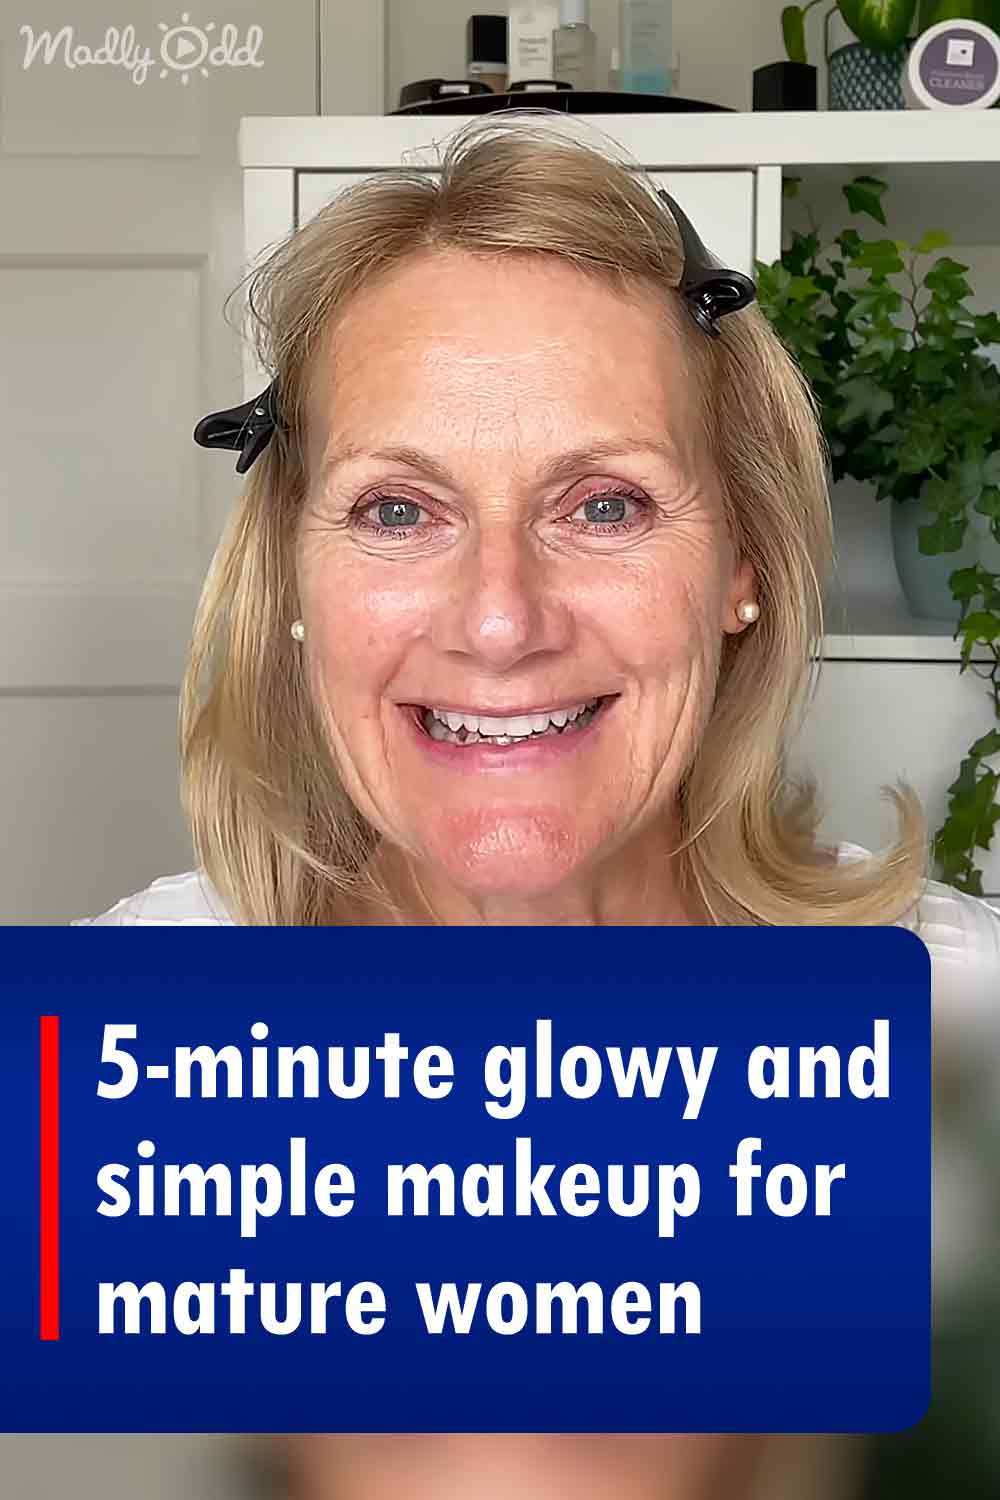 5-minute glowy and simple makeup for mature women